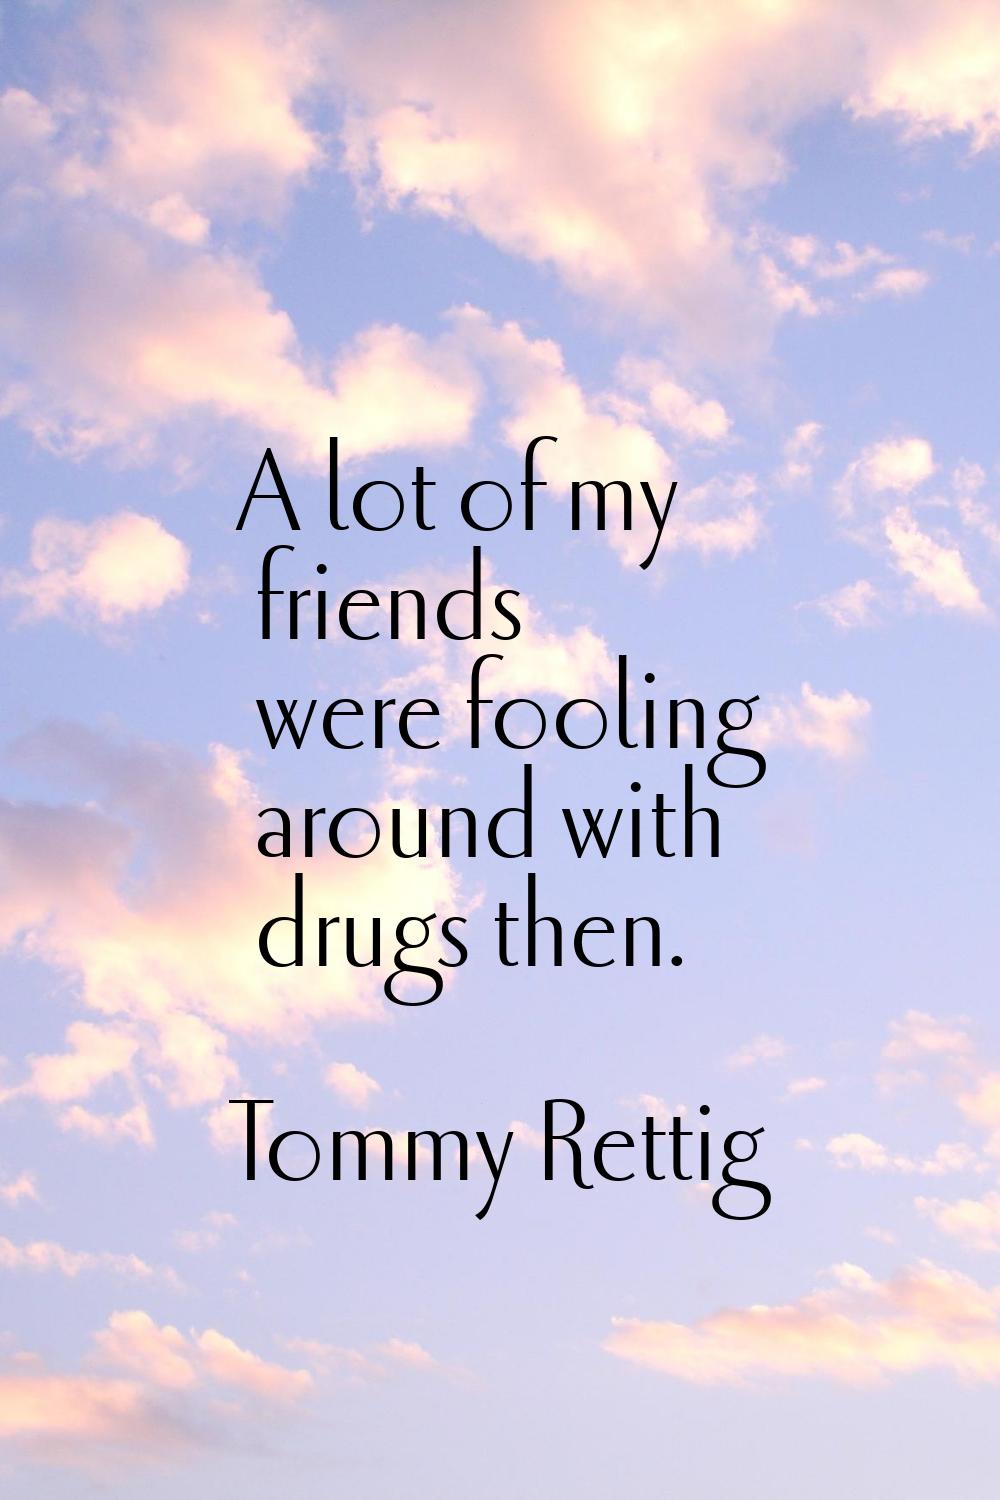 A lot of my friends were fooling around with drugs then.